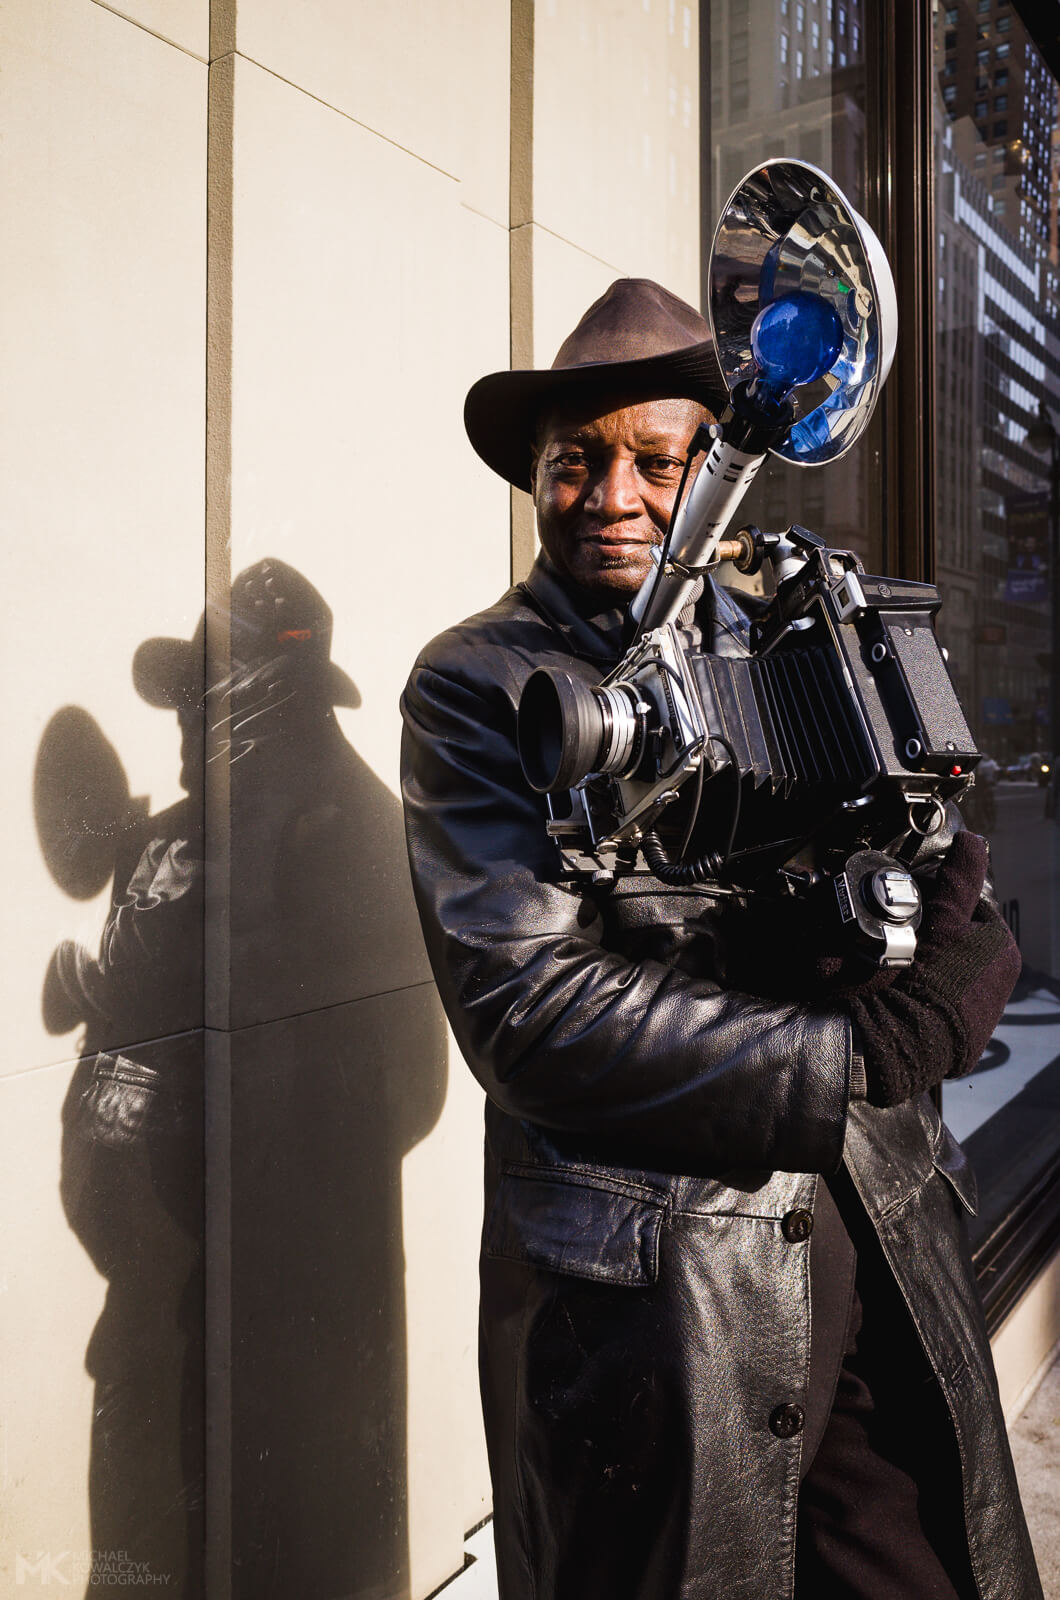 NEW YORK, USA - MAY 06, 2013: Louis Mendes, a photographer from